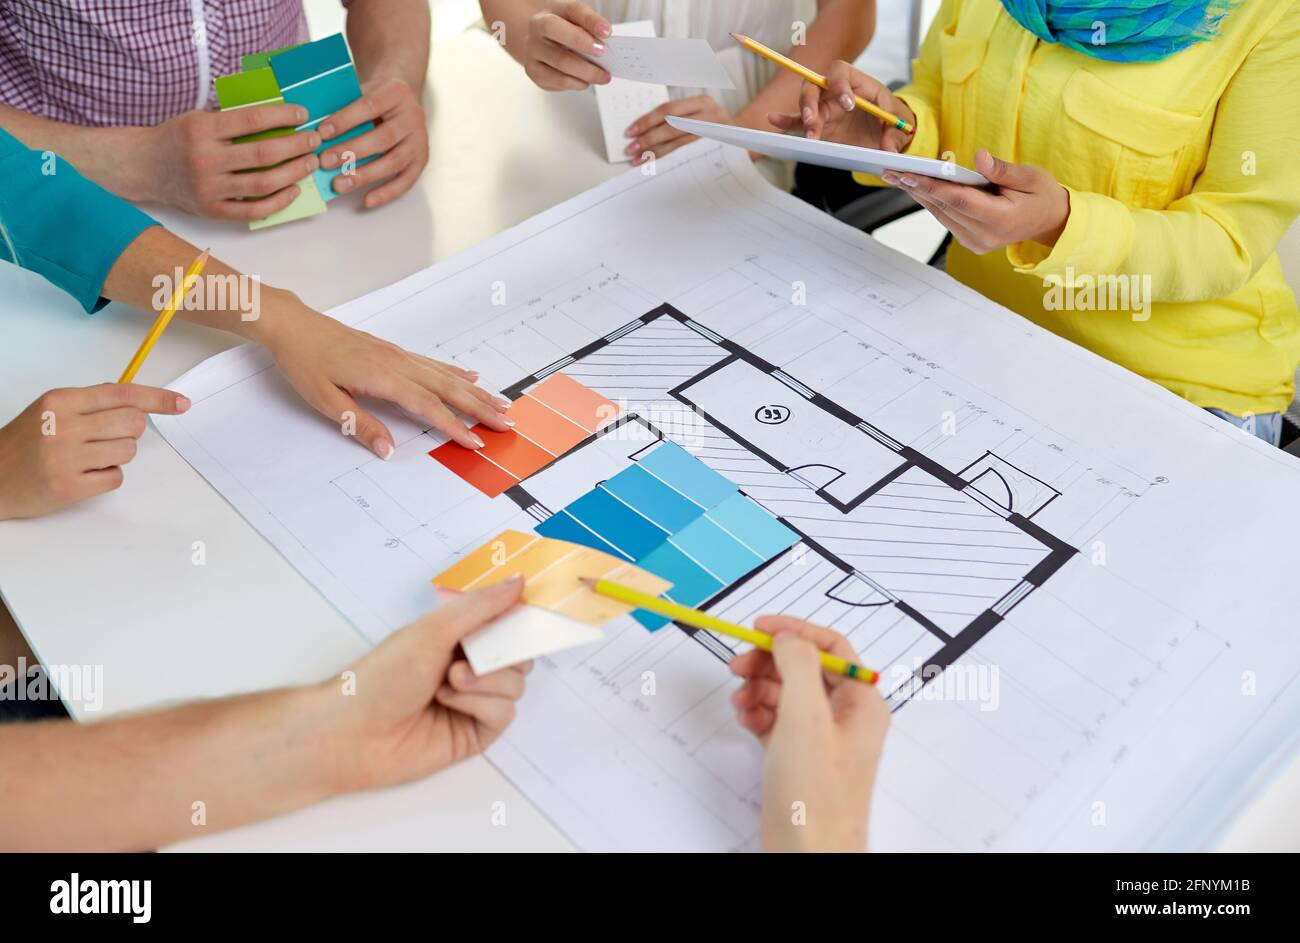 close up of architects team working with blueprint Stock Photo